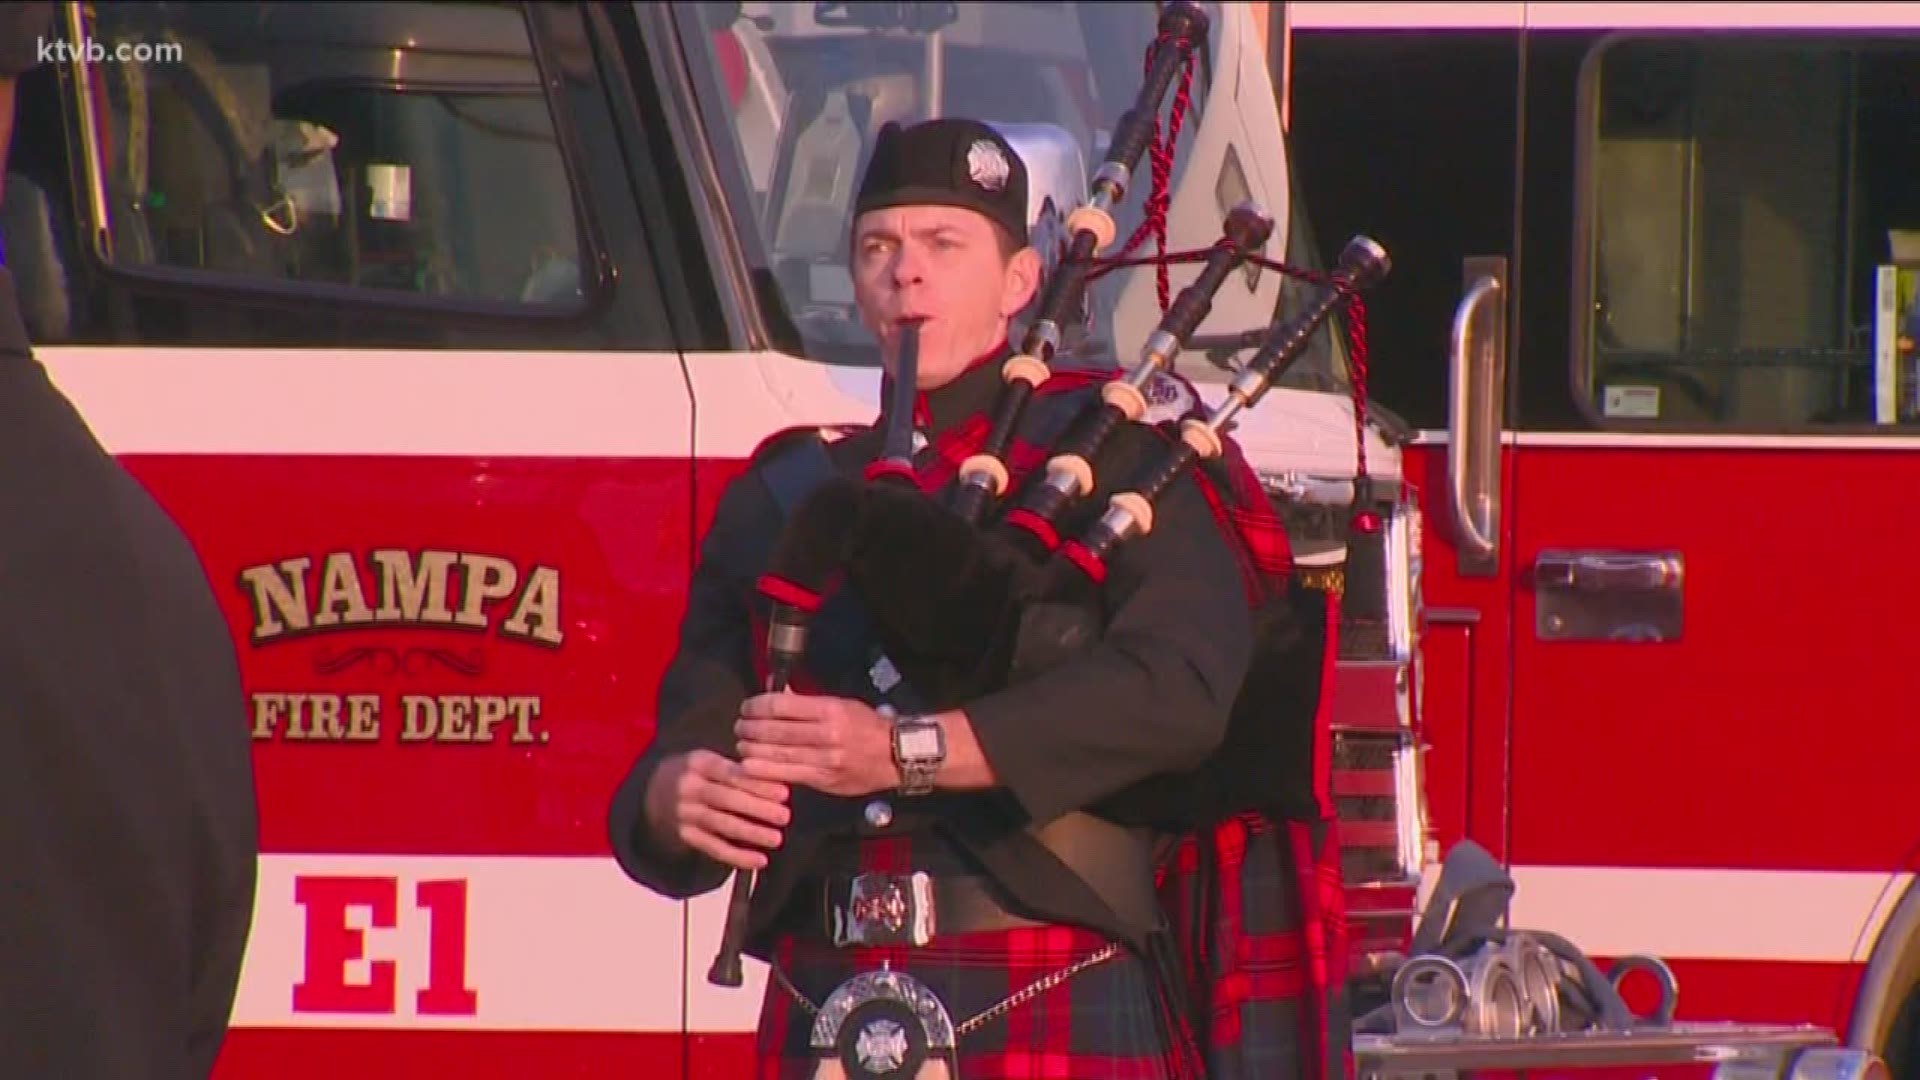 The community gathered in Nampa Tuesday to reflect on the lives lost 17 years ago.